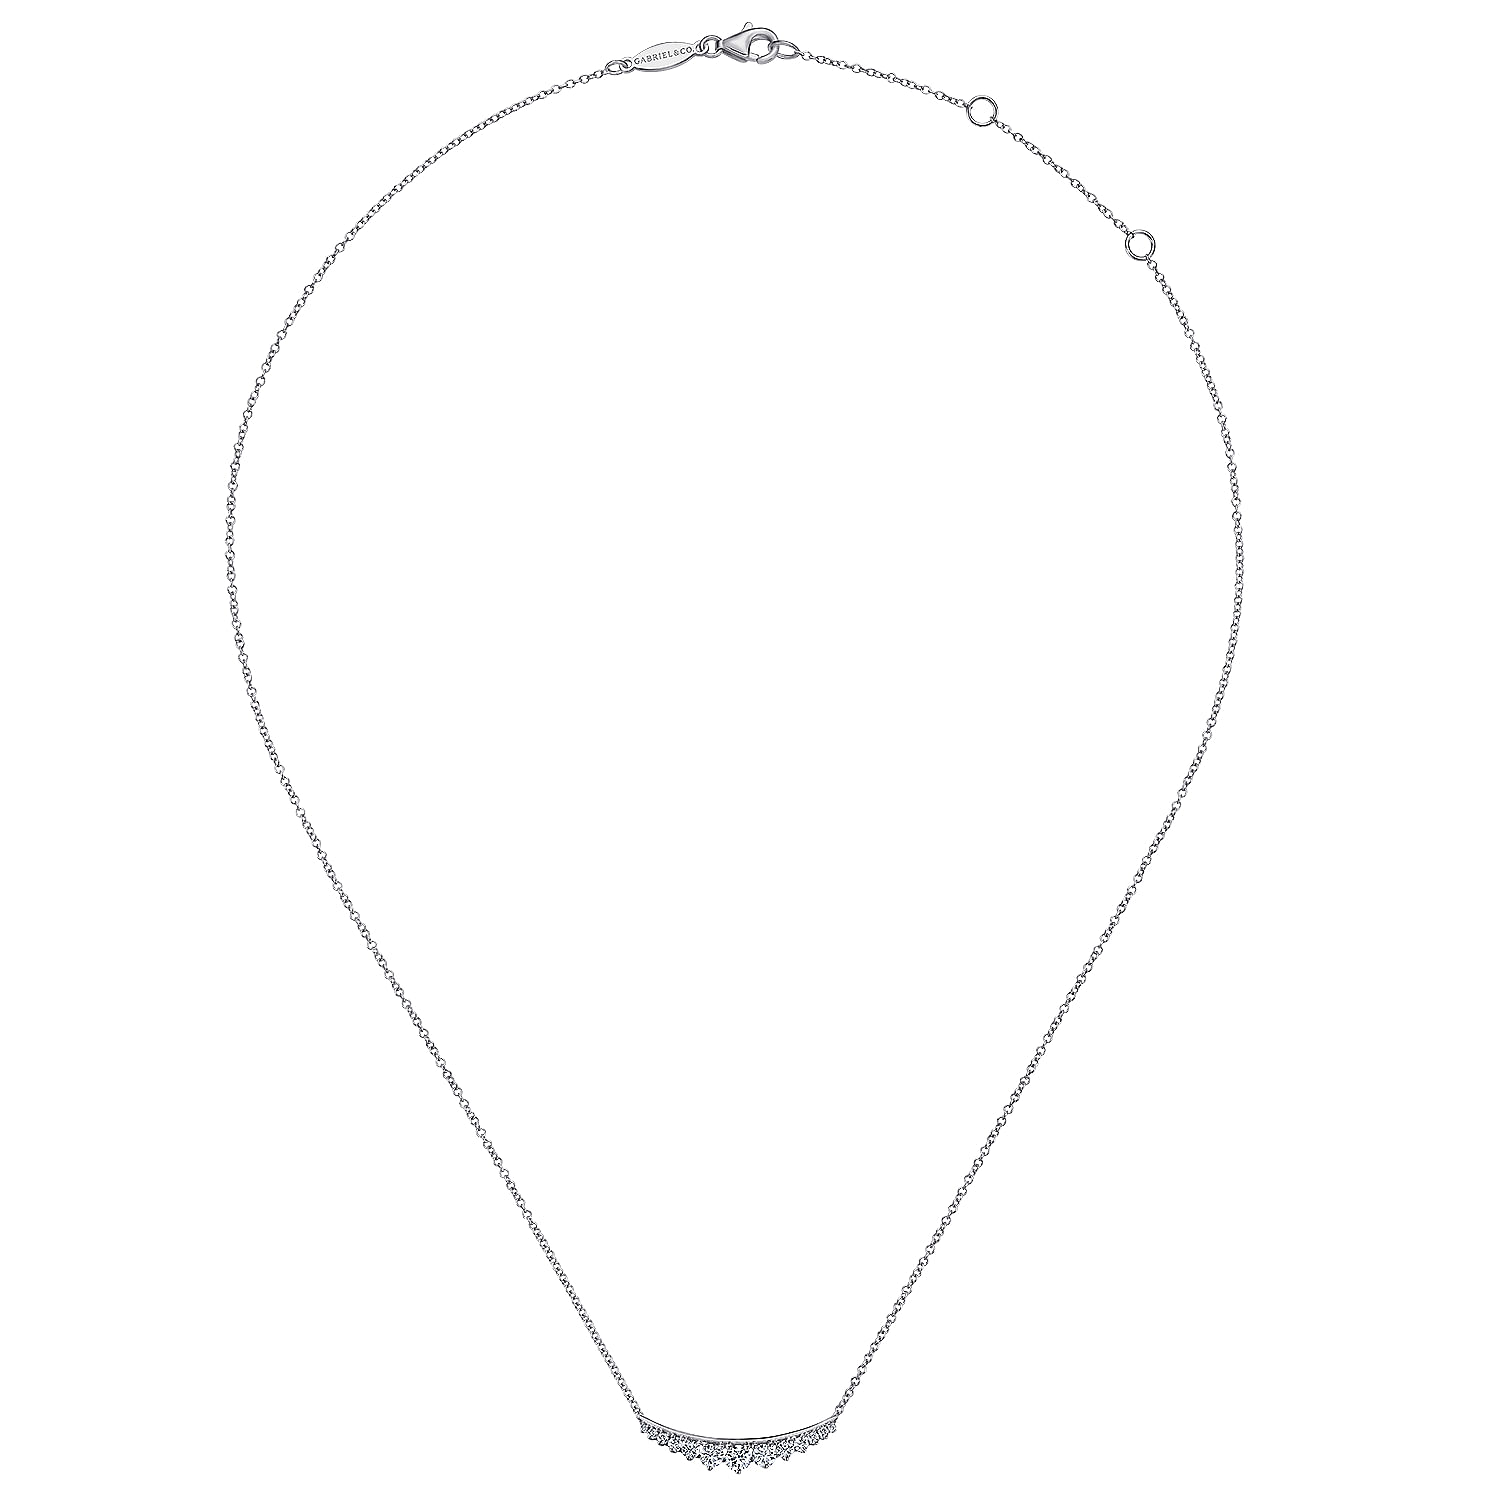 14K White Gold Curved Diamond Bar Necklace